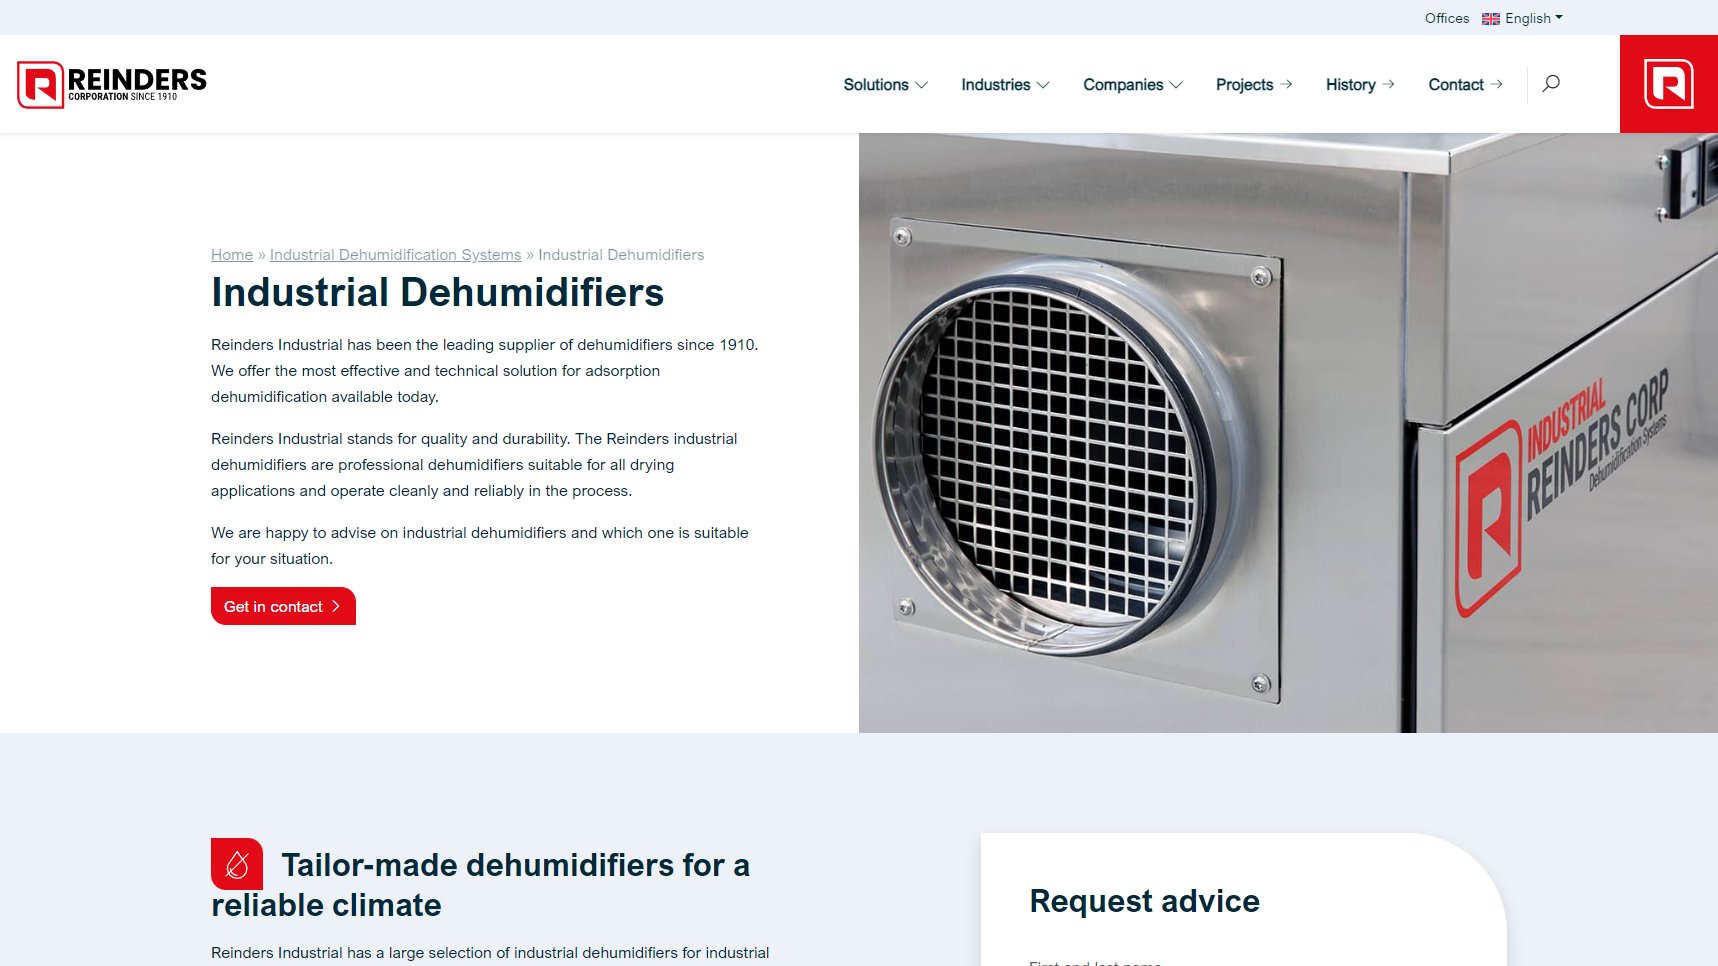 Reinders Industrial Dehumidification Systems - Industrial Dehumidifier Manufacturer